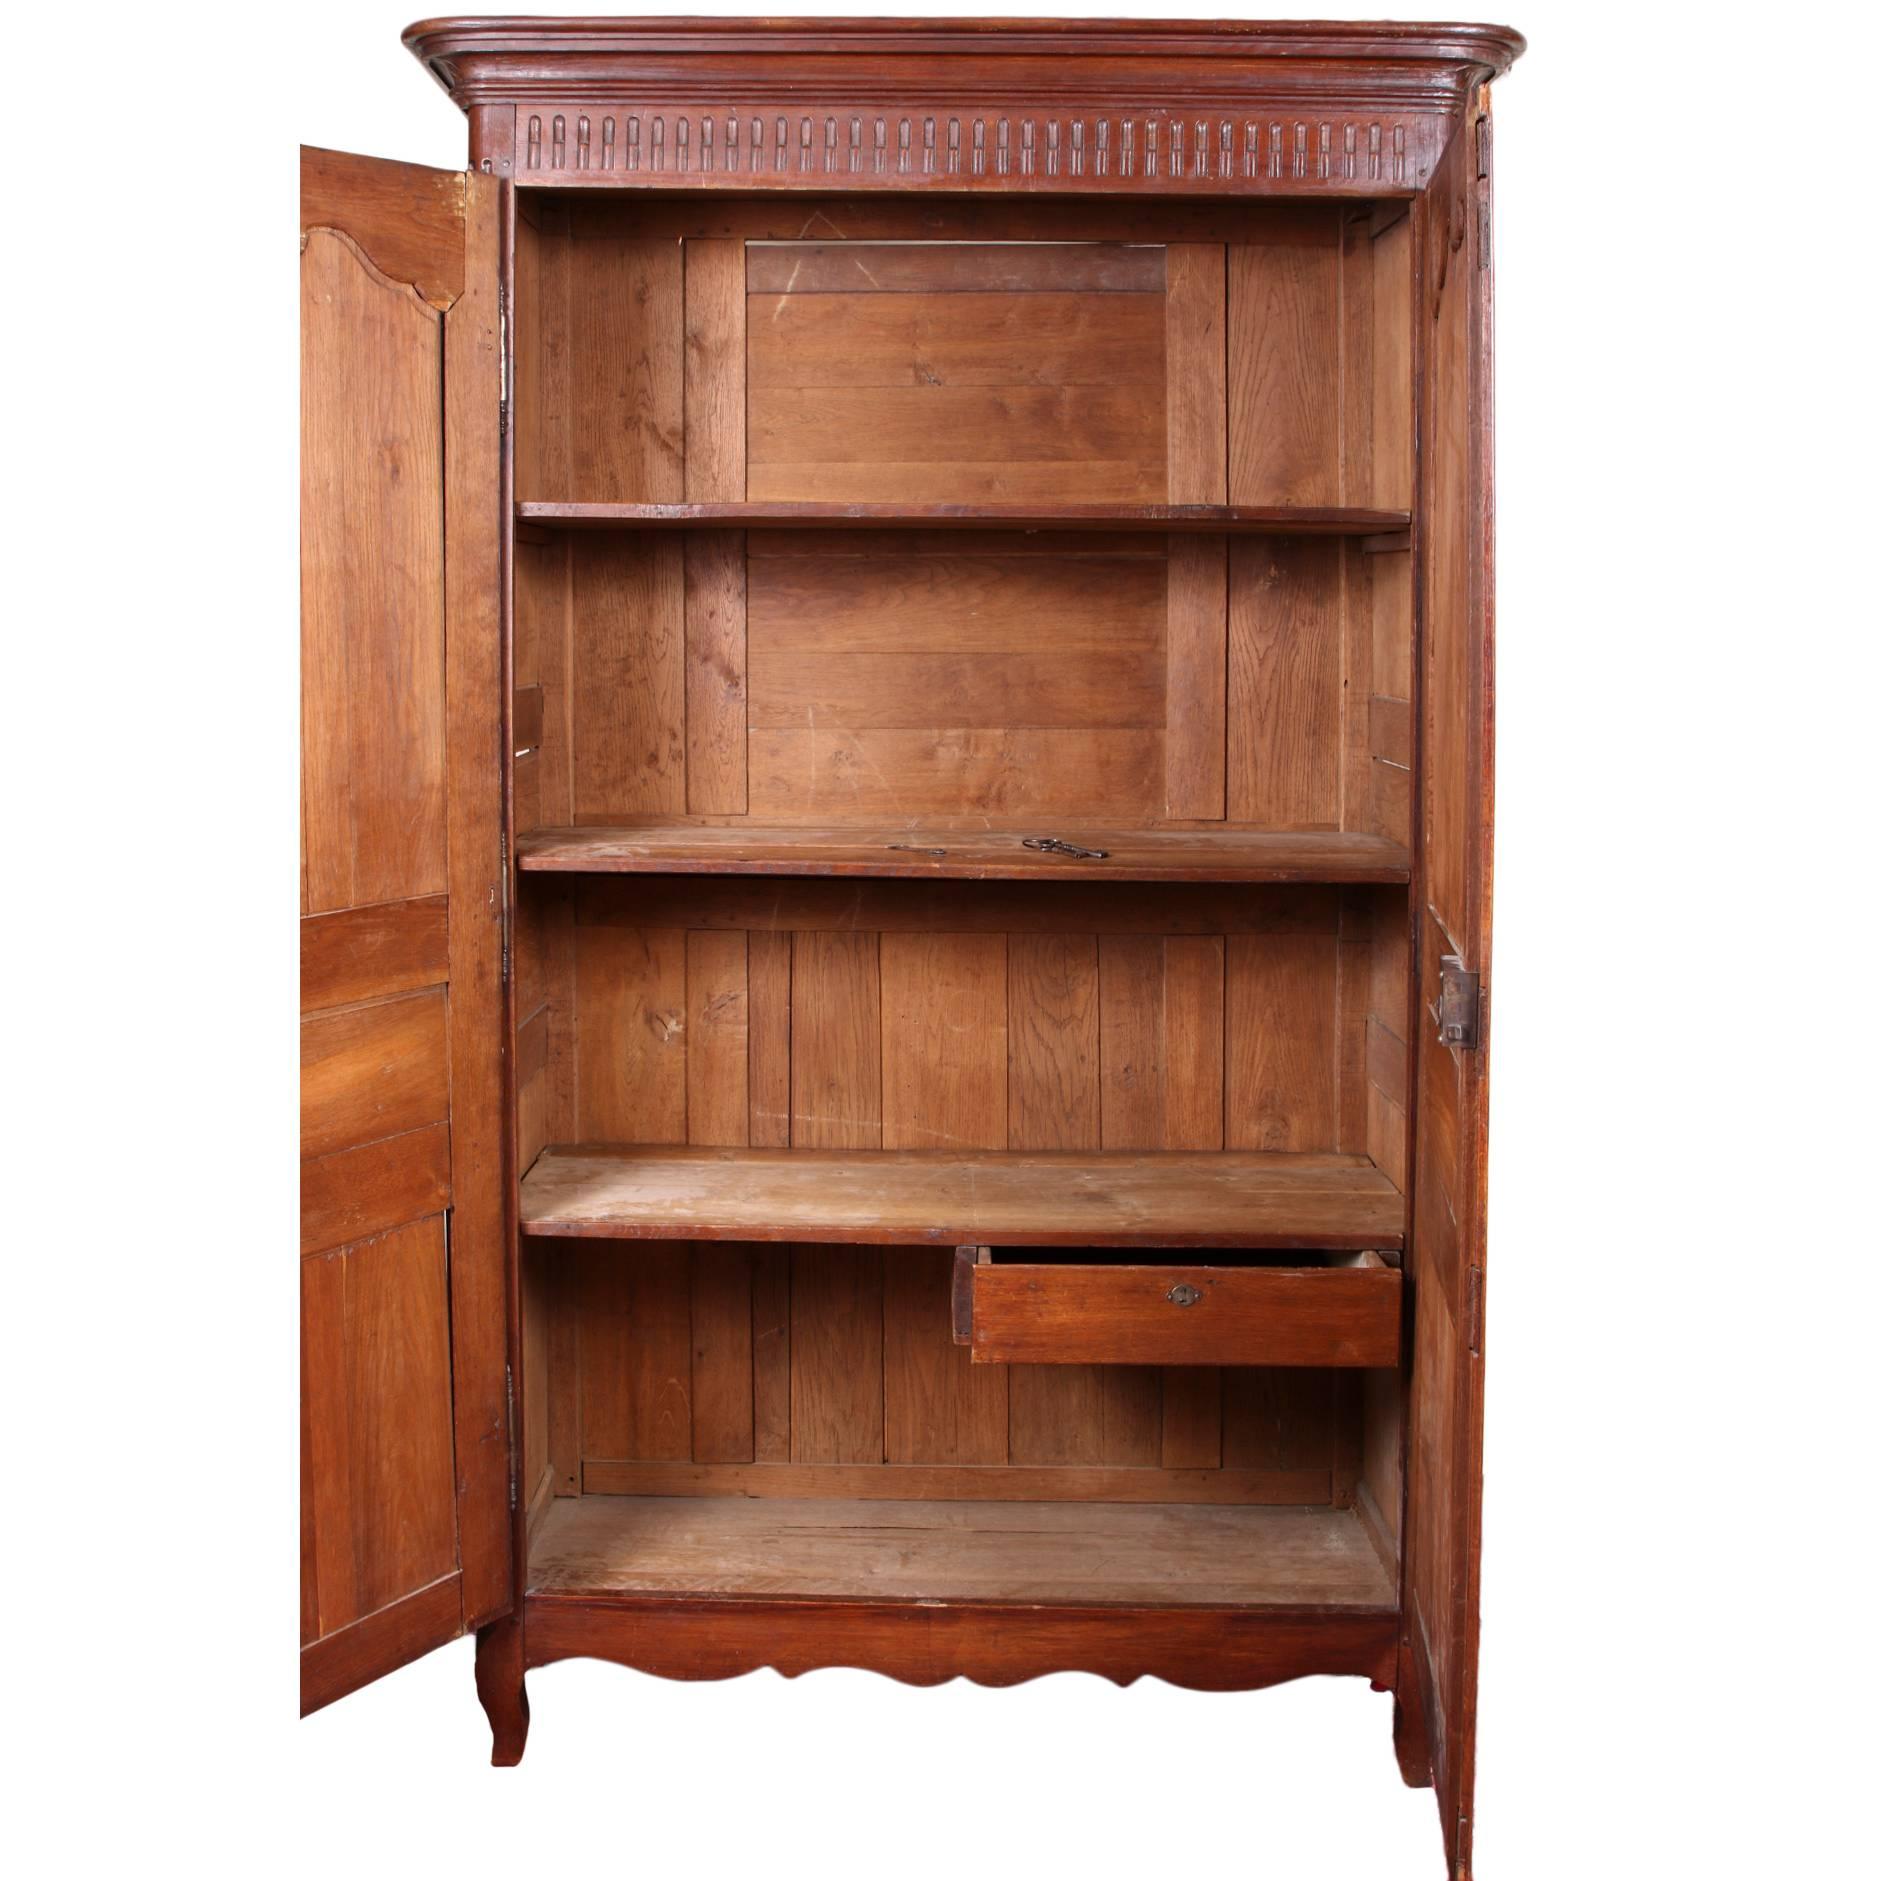 Antique French armoire, 19th century, double door with triple recessed and craved panels, the top ones shaped and carved, large carved overhanging cornice above a reeded frame, reeded side supports and carved side panels, opens to reveal storage